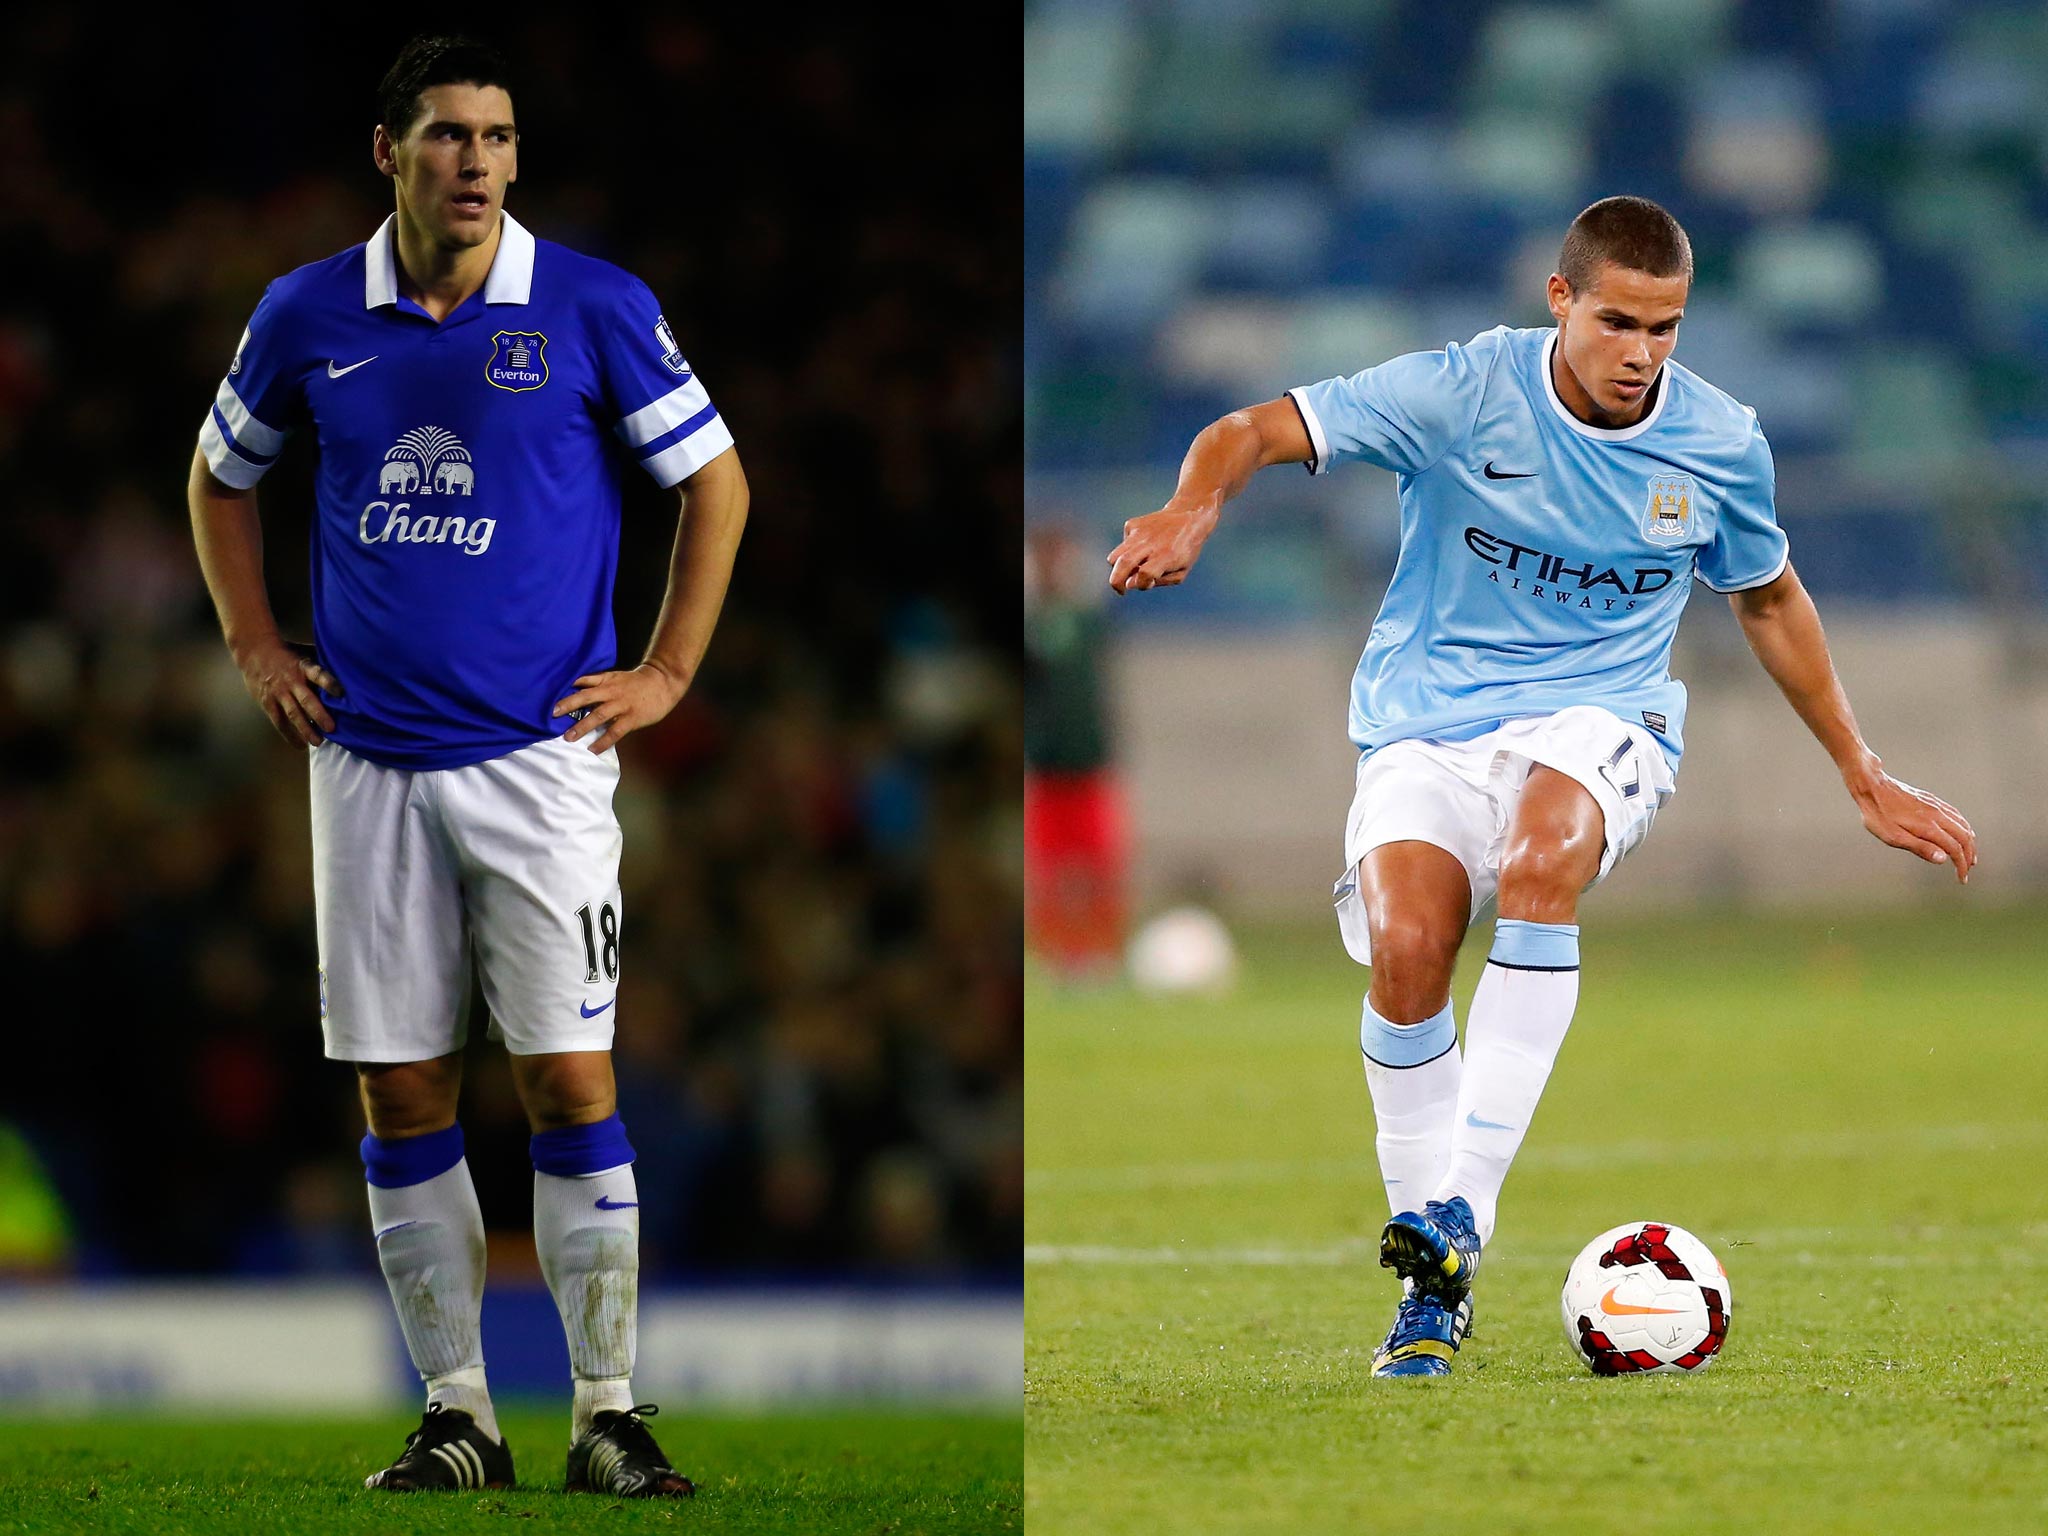 Gareth Barry and Jack Rodwell could both be on their way to Everton from Manchester City in permanent deals in the summer